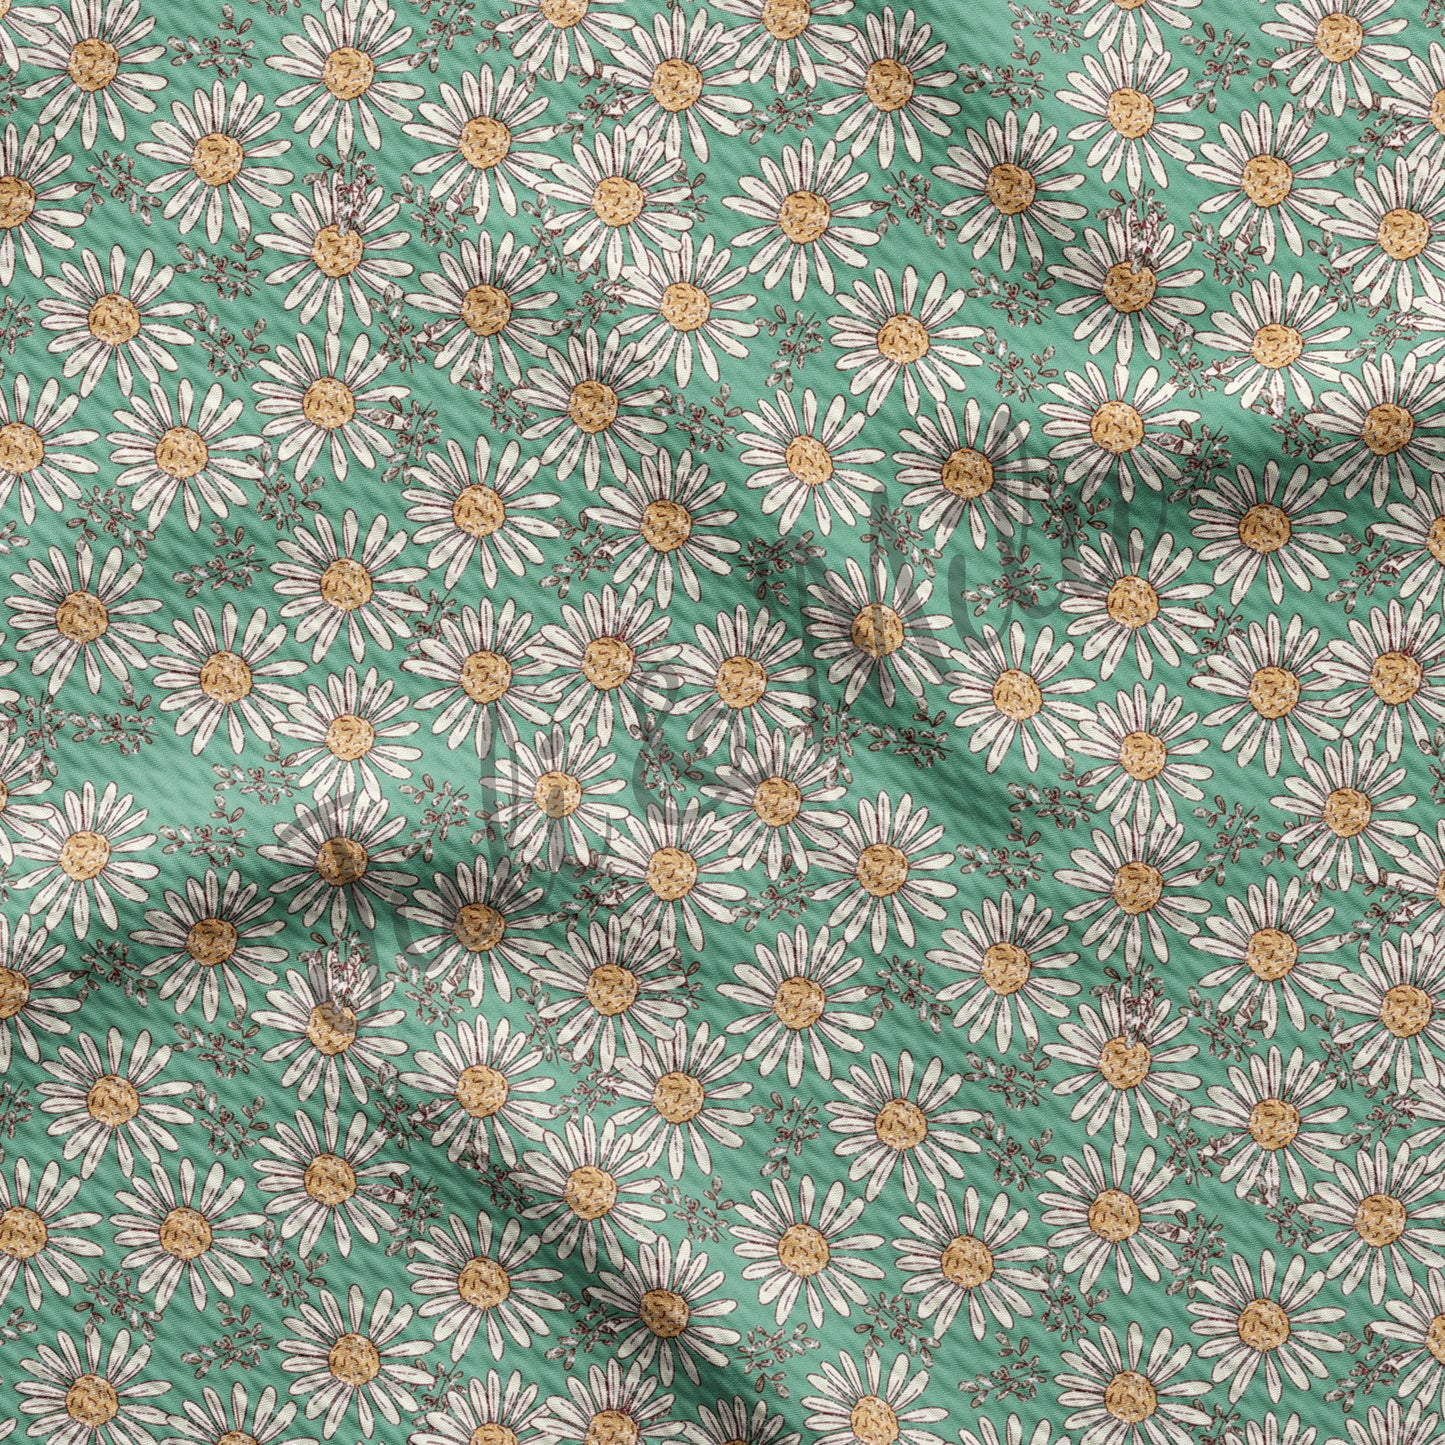 Floral Printed Bullet Textured Fabric Floral66